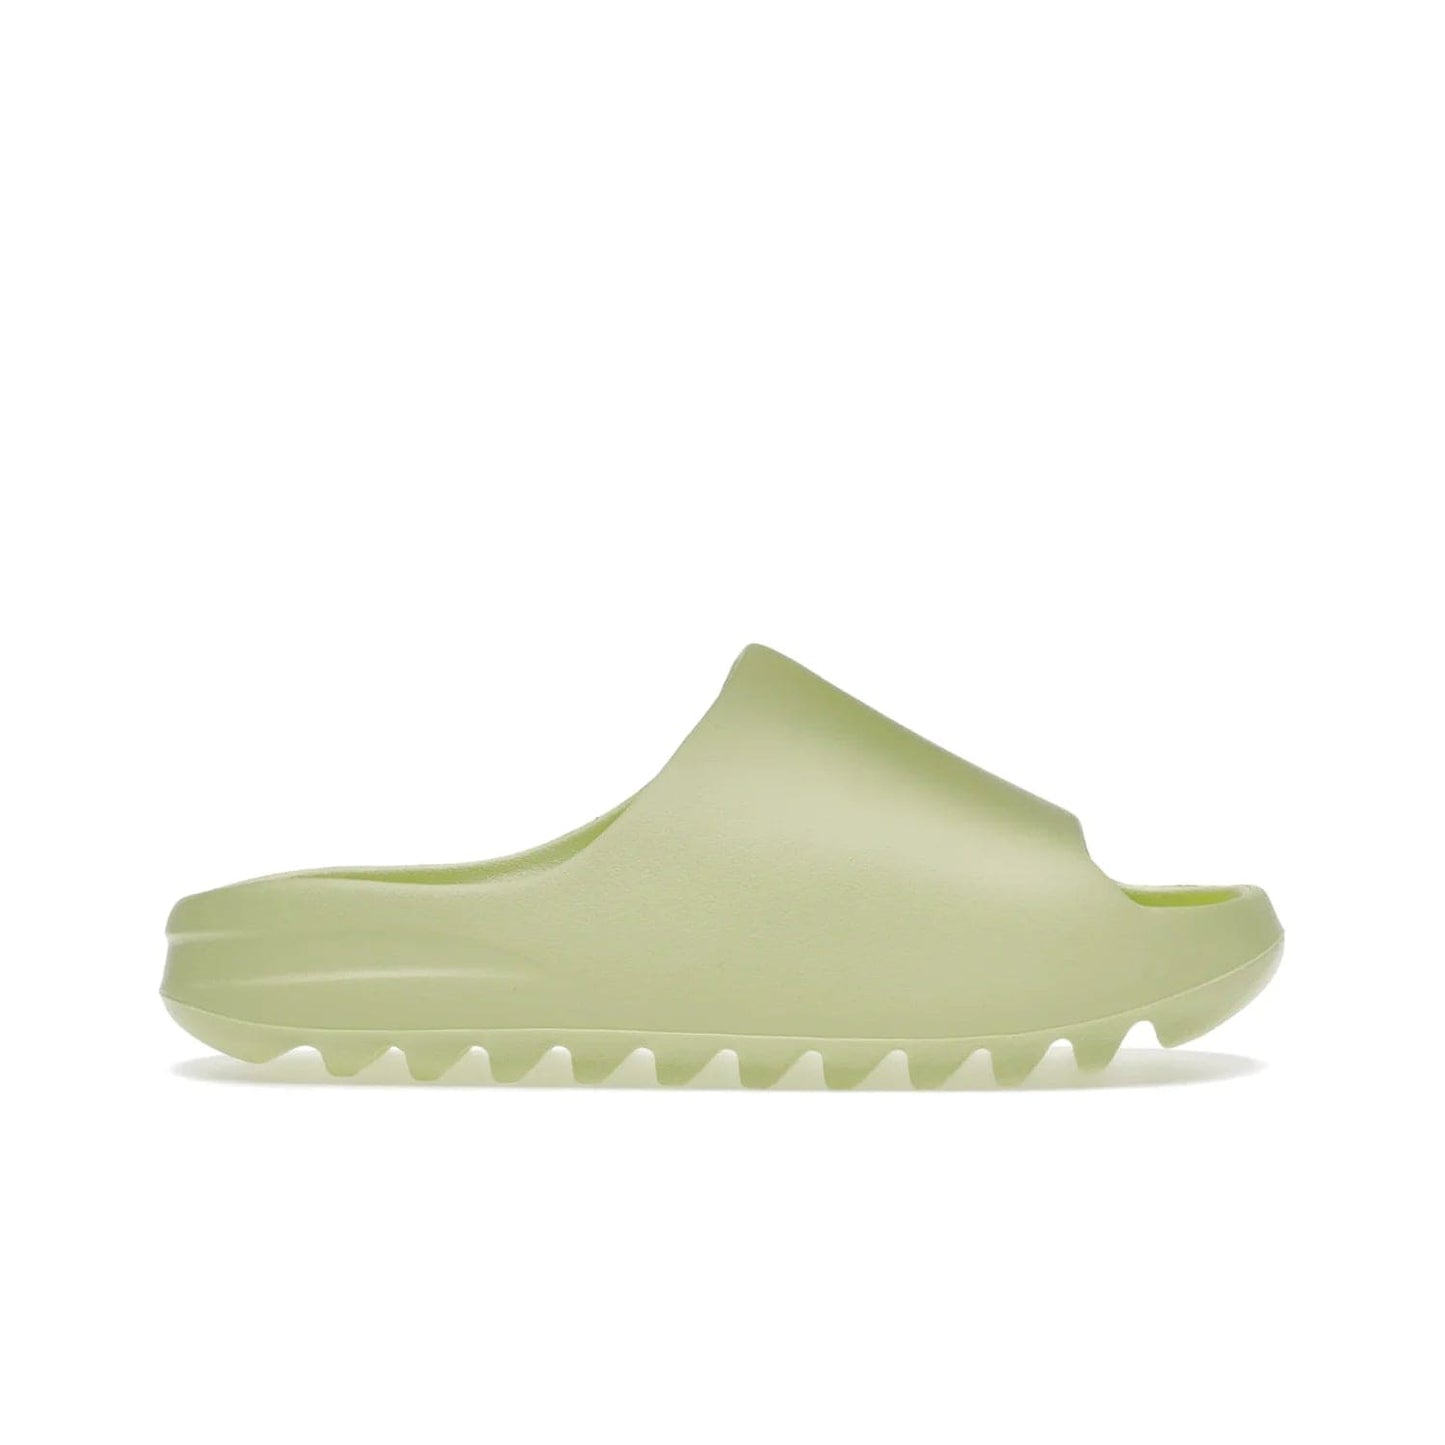 adidas Yeezy Slide Glow Green (2022) (Restock) - Image 1 - Only at www.BallersClubKickz.com - #
Introducing the Adidas Yeezy Slide Glow Green (2022) Restock. Offering ultimate comfort & responsive style with its grooved outsole. Grab your pair on May 2022 for an unforgettable addition to your sneaker collection. US and UK sizes the same.